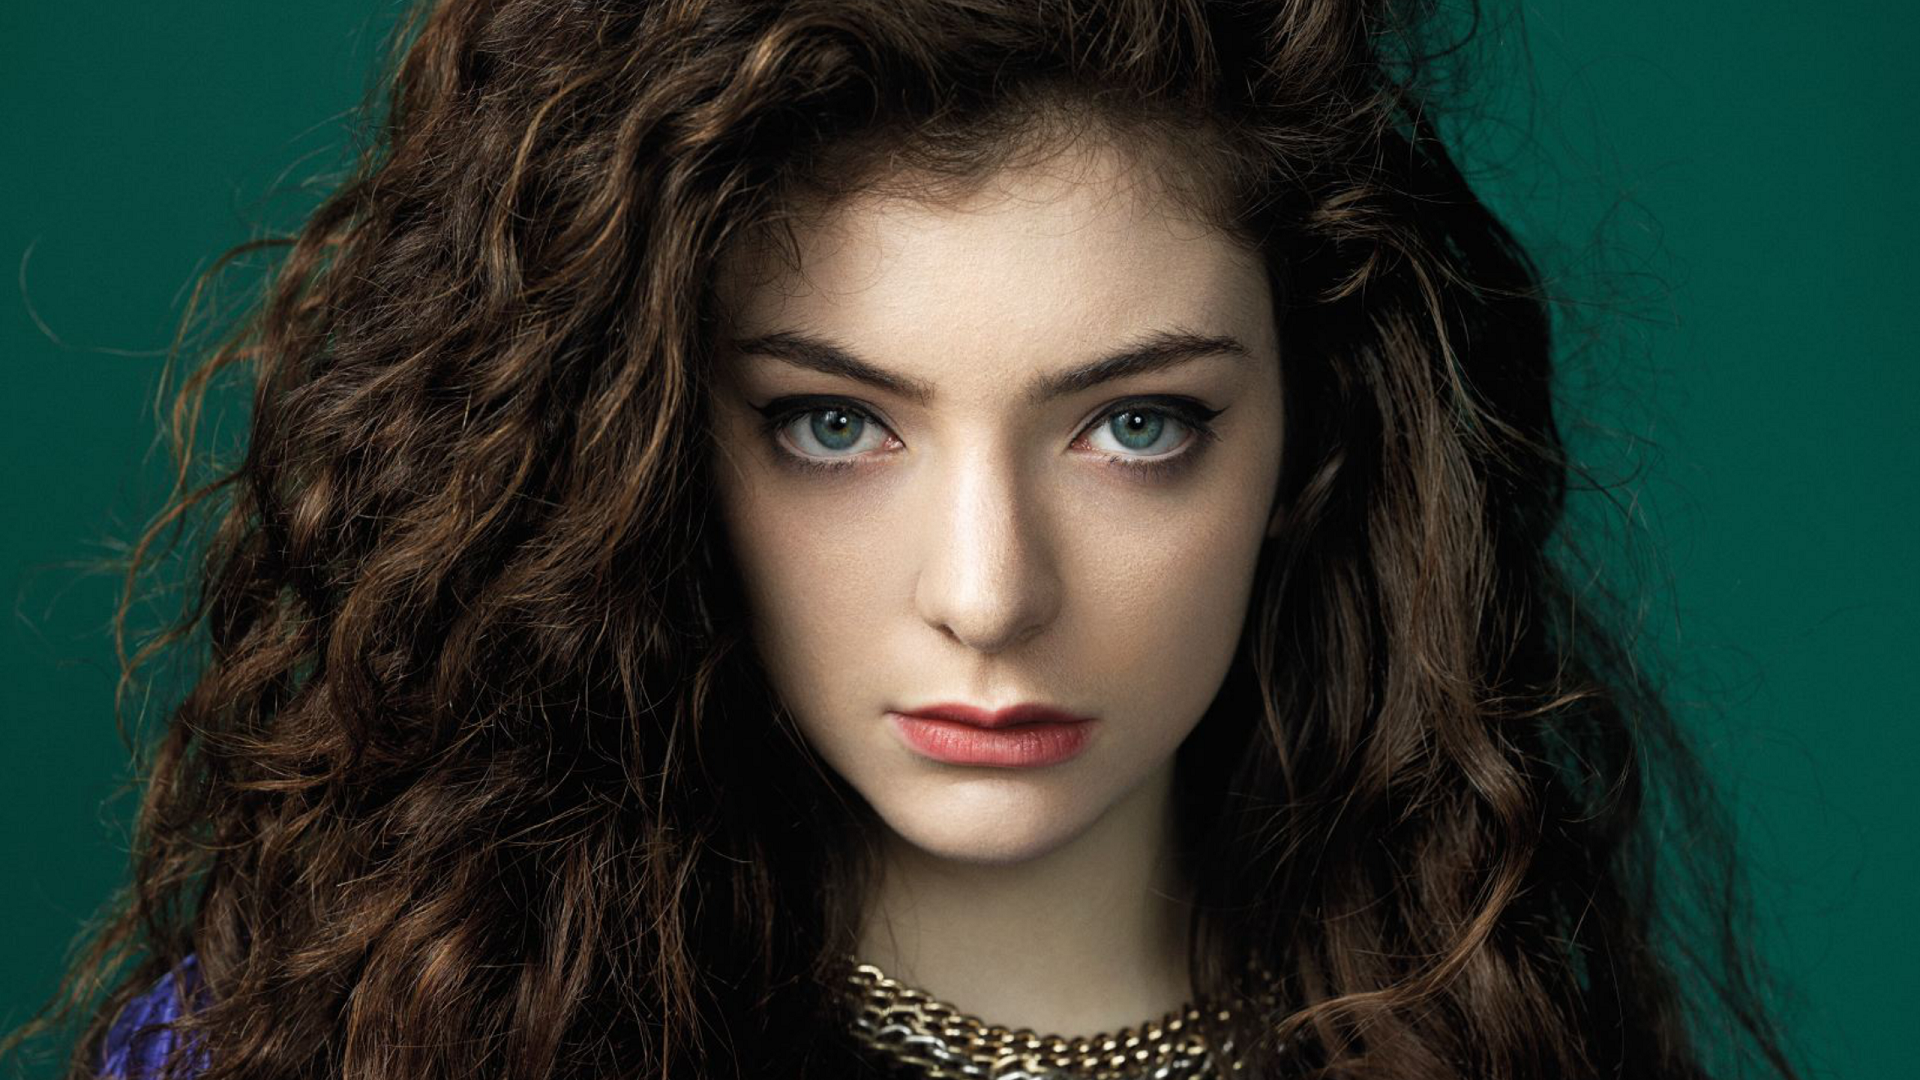 Music Lorde HD Wallpaper Background Image.